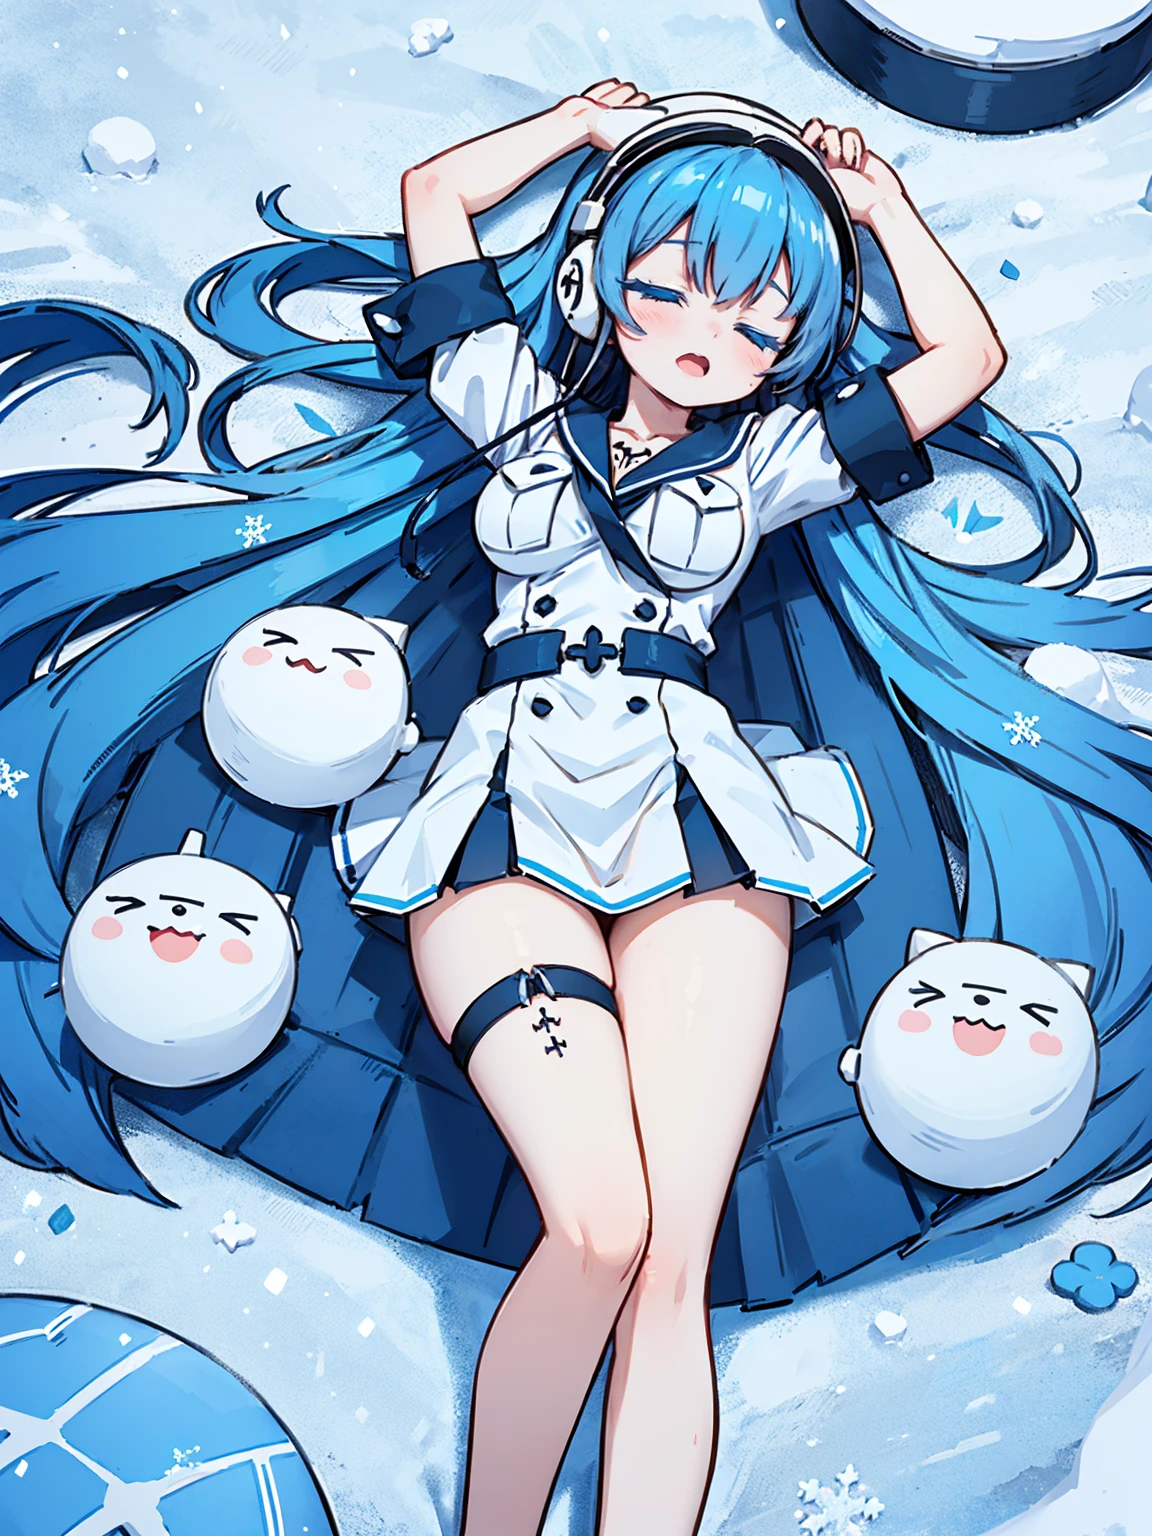 (artwork, best quality) a girl with long blue hair, closed eyes, blue eyelashes, white sailor suit, big breasts, perfect body, beautiful eyes, good waist, tattoo, screaming with joy, arms and legs open, listening to music with a headset, lying in the snow